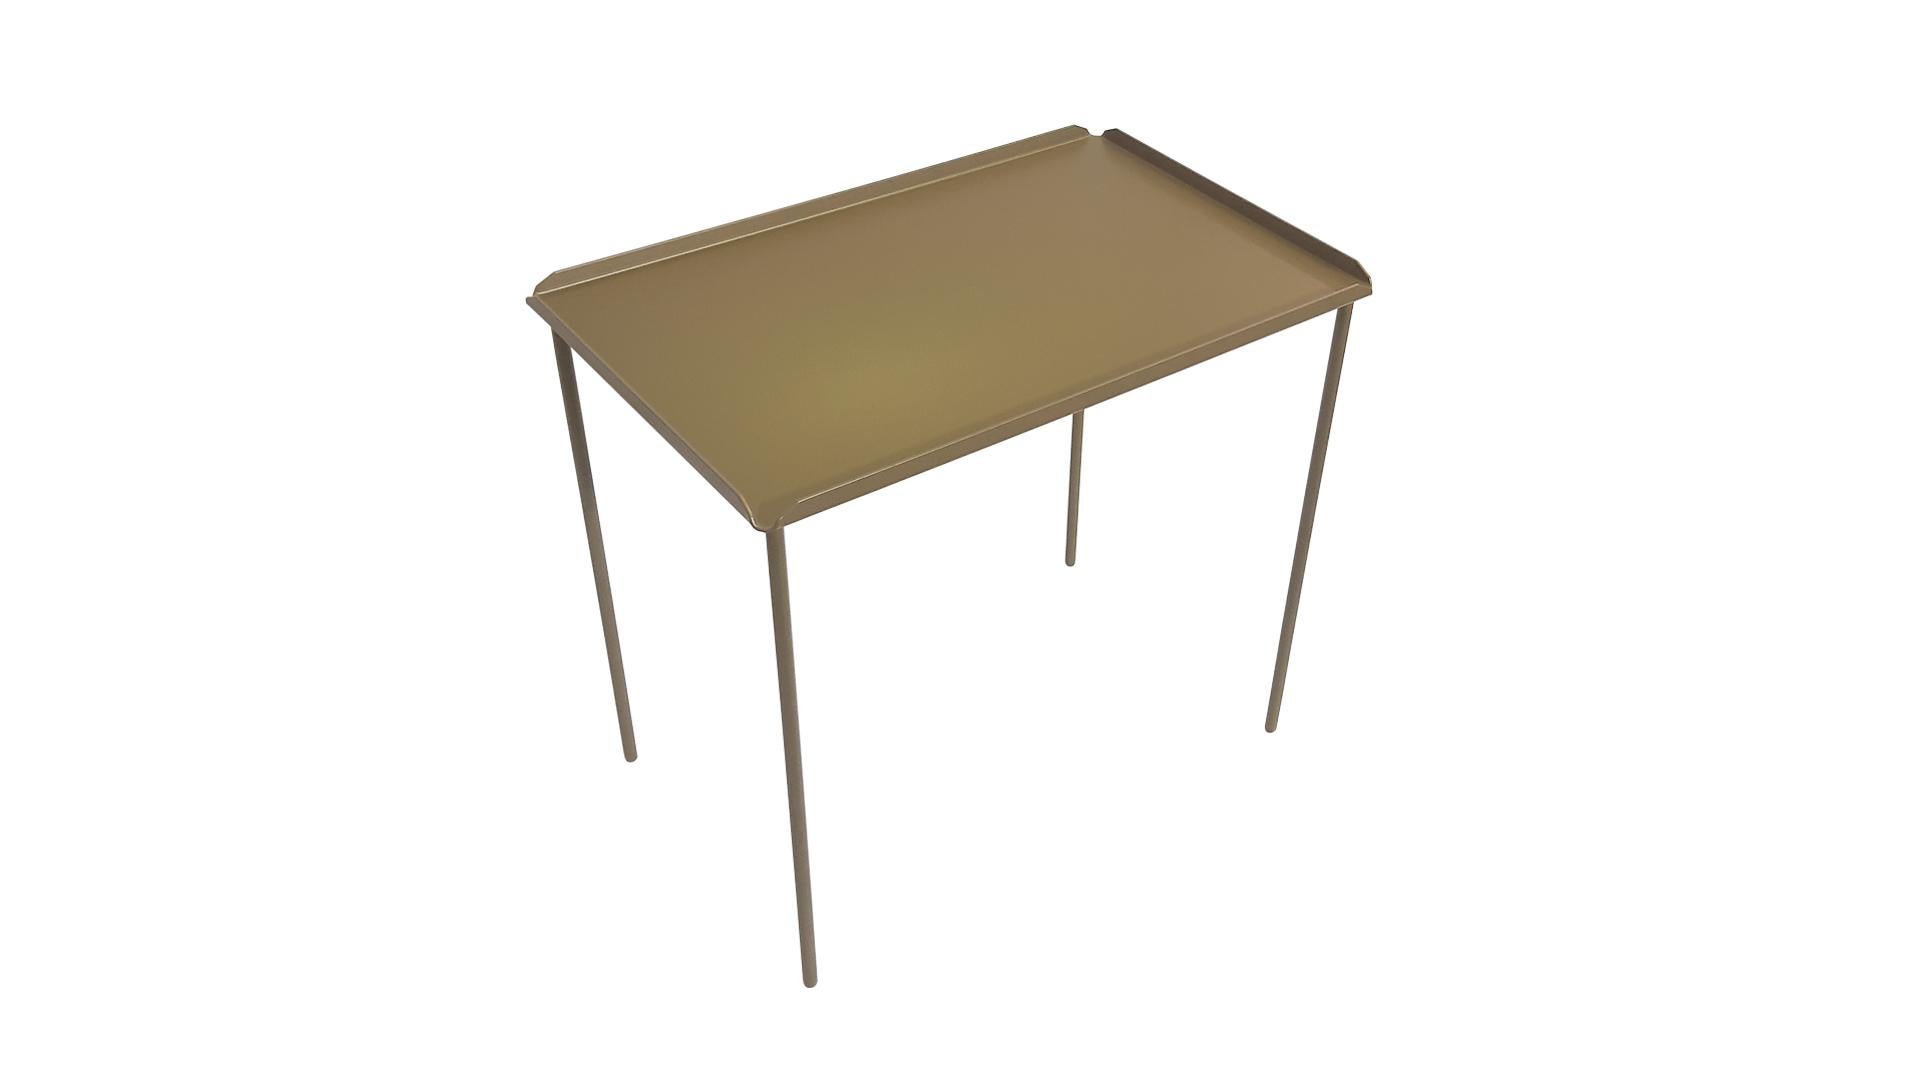 A compact contemporary italian coffee table built of a single steel sheet folded on the edges with four tapered legs rounded off on the tip.

Built of steel, powder coating with brass finish or burnished steel finish, also available in the colors: